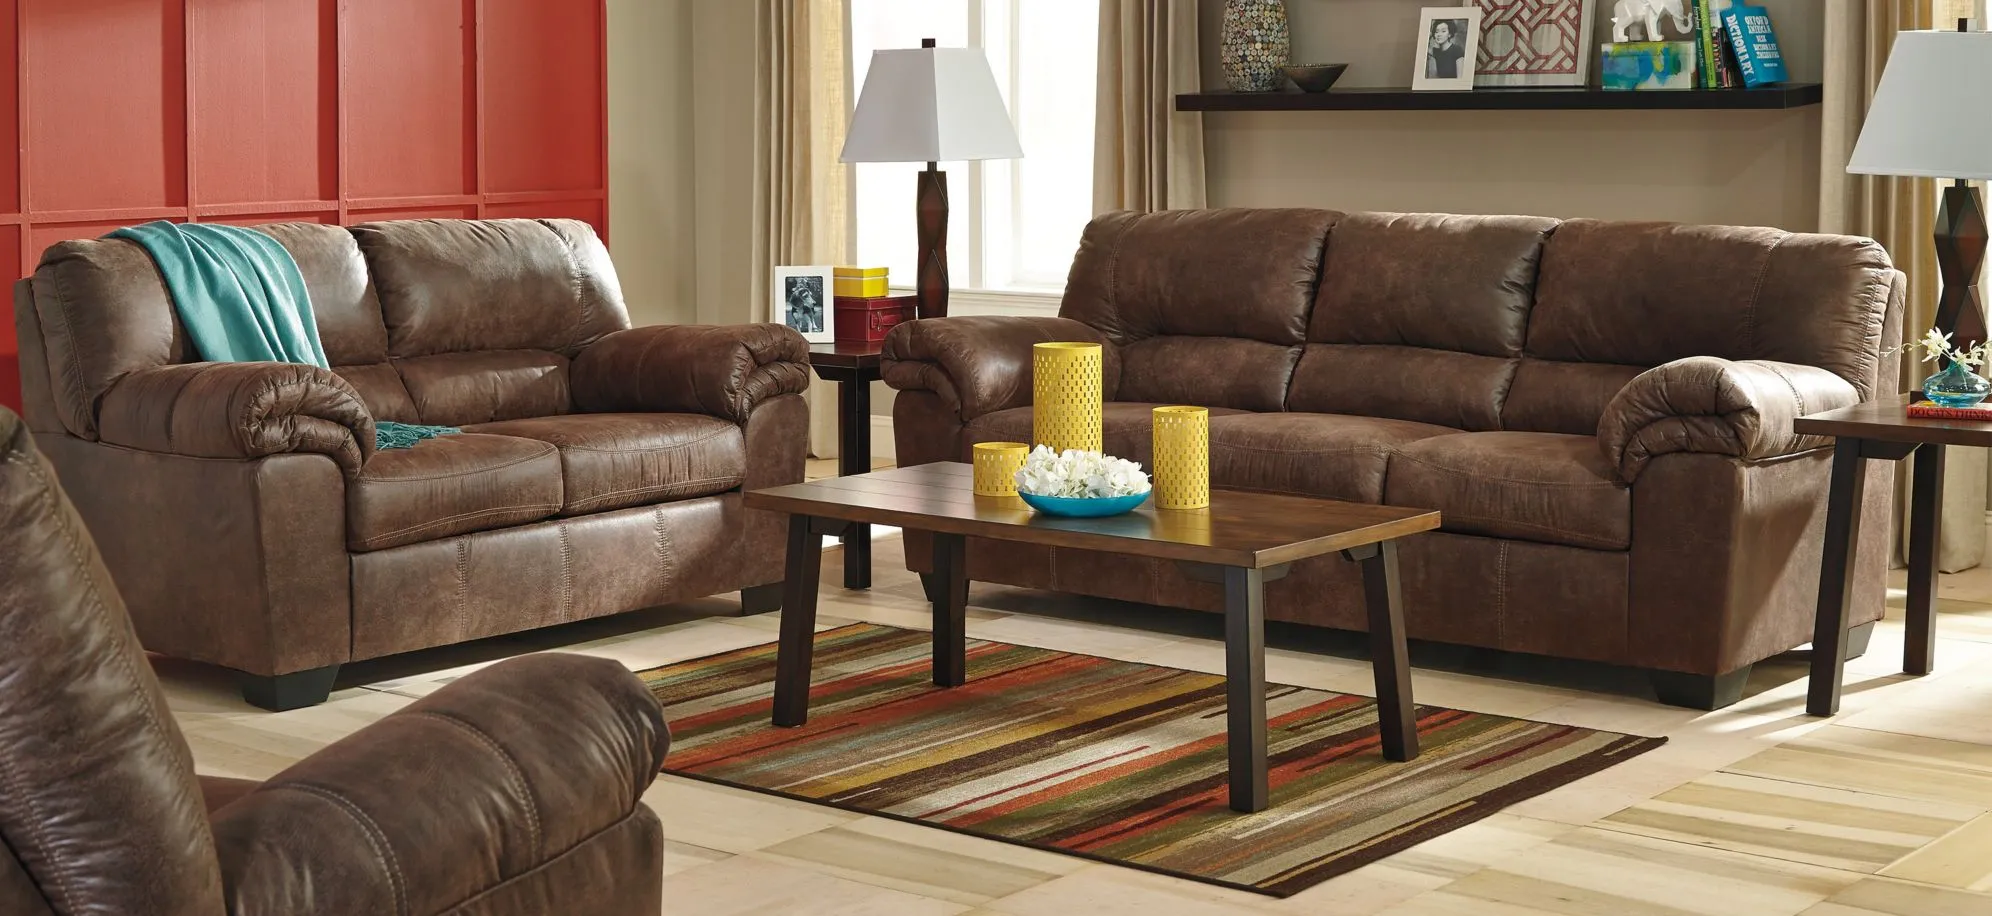 Livingston 2-pc. Leather-Look Sofa and Loveseat Set in Brown by Ashley Furniture